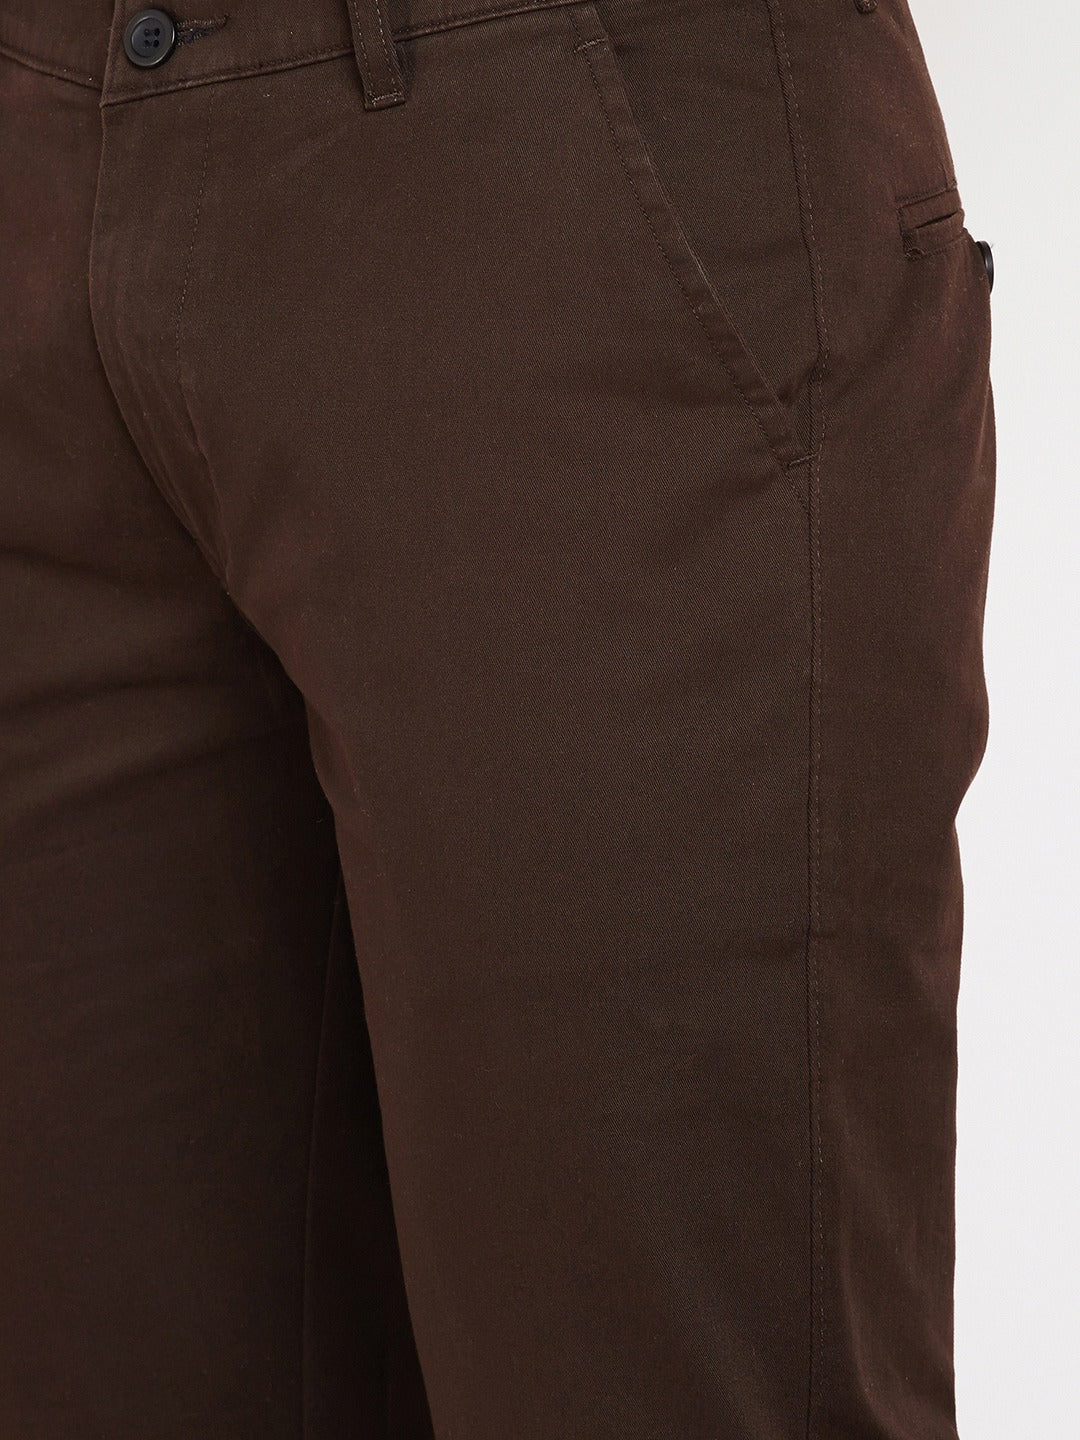 Men Brown Self Design Solid Stretchable Mid Rise Slim Fit Chinos Trouser